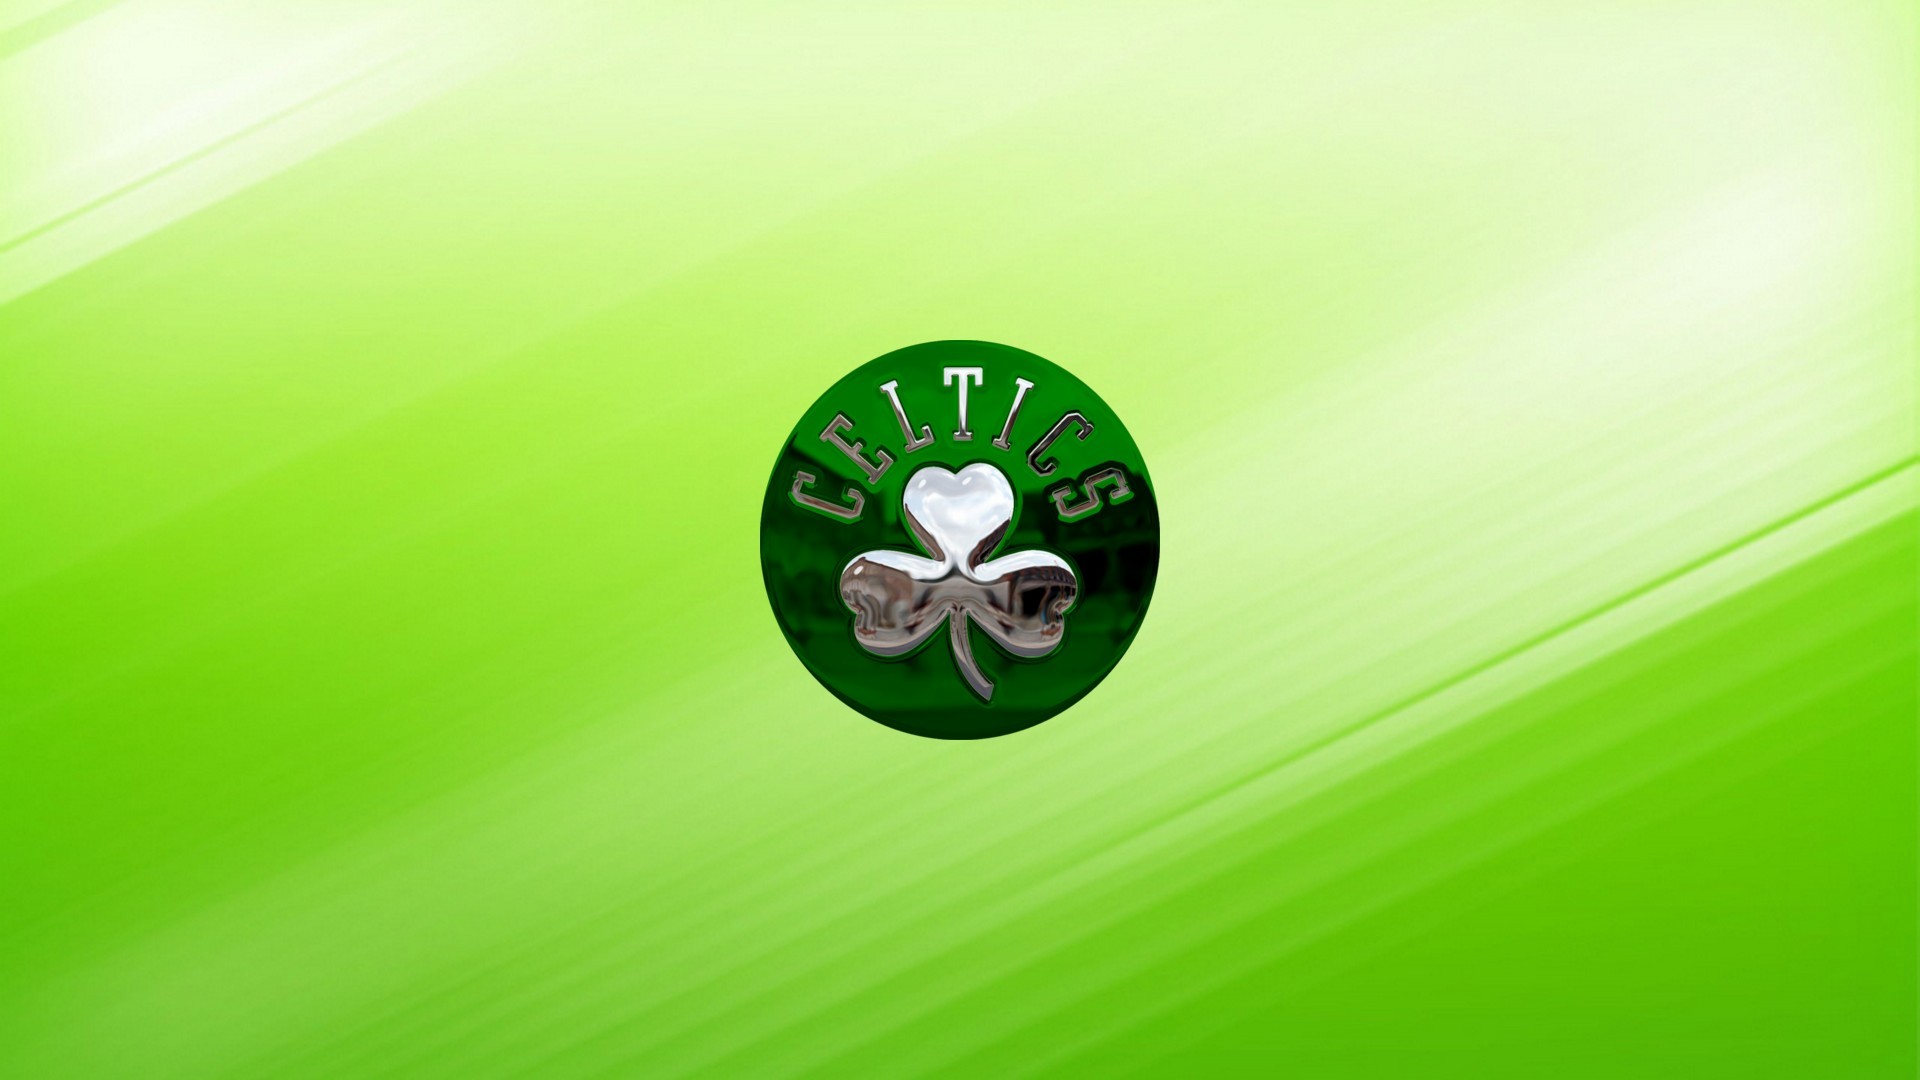 1920x1080 Wallpapers HD Boston Celtics with image dimensions  pixel. You can  make this wallpaper for